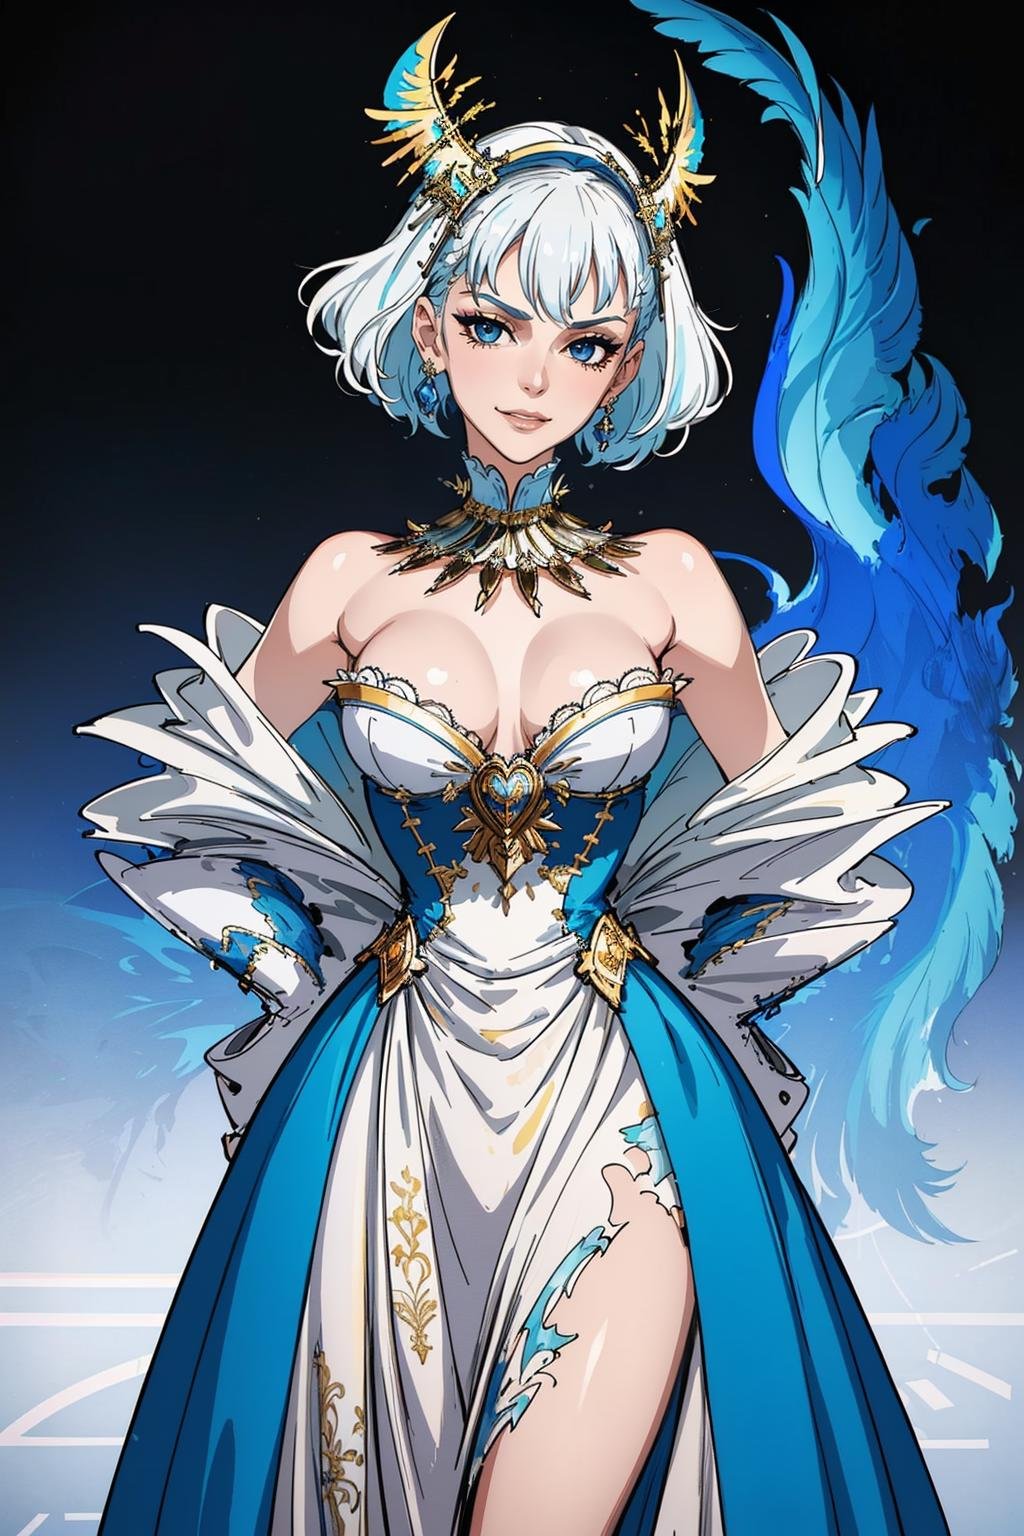 ((Masterpiece, best quality,edgQuality)),smirk,smug,white hair,Haute_Couture, blue gown,golden embroidery, woman wearing a Haute_Couture dress,(((edgTM, wearing edgTM_style fashion, eccentric clothing))),feathers, <lora:edgLycorisMugler-light:1>